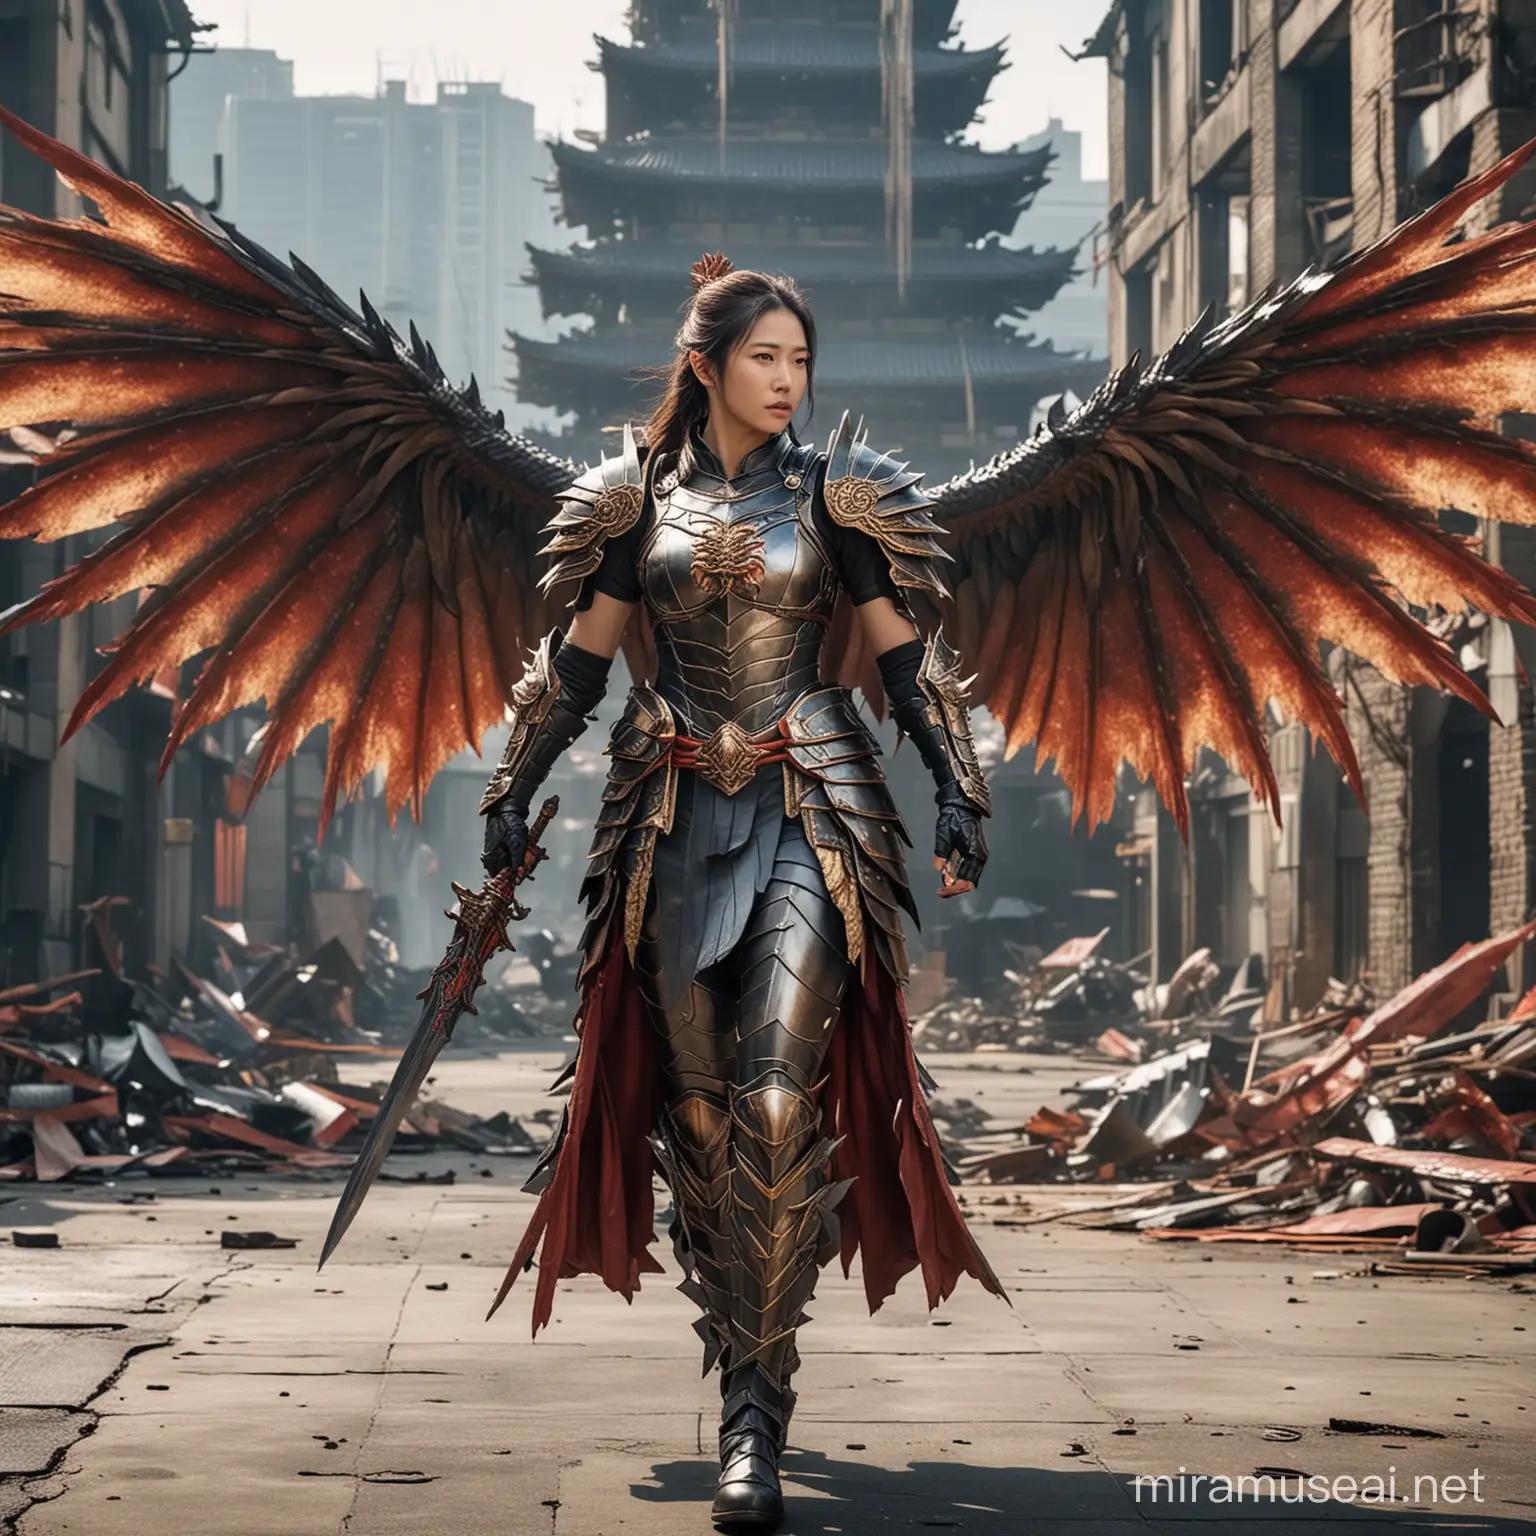 Woman japan wearing armor with wings, and dragon in the back, background building crash